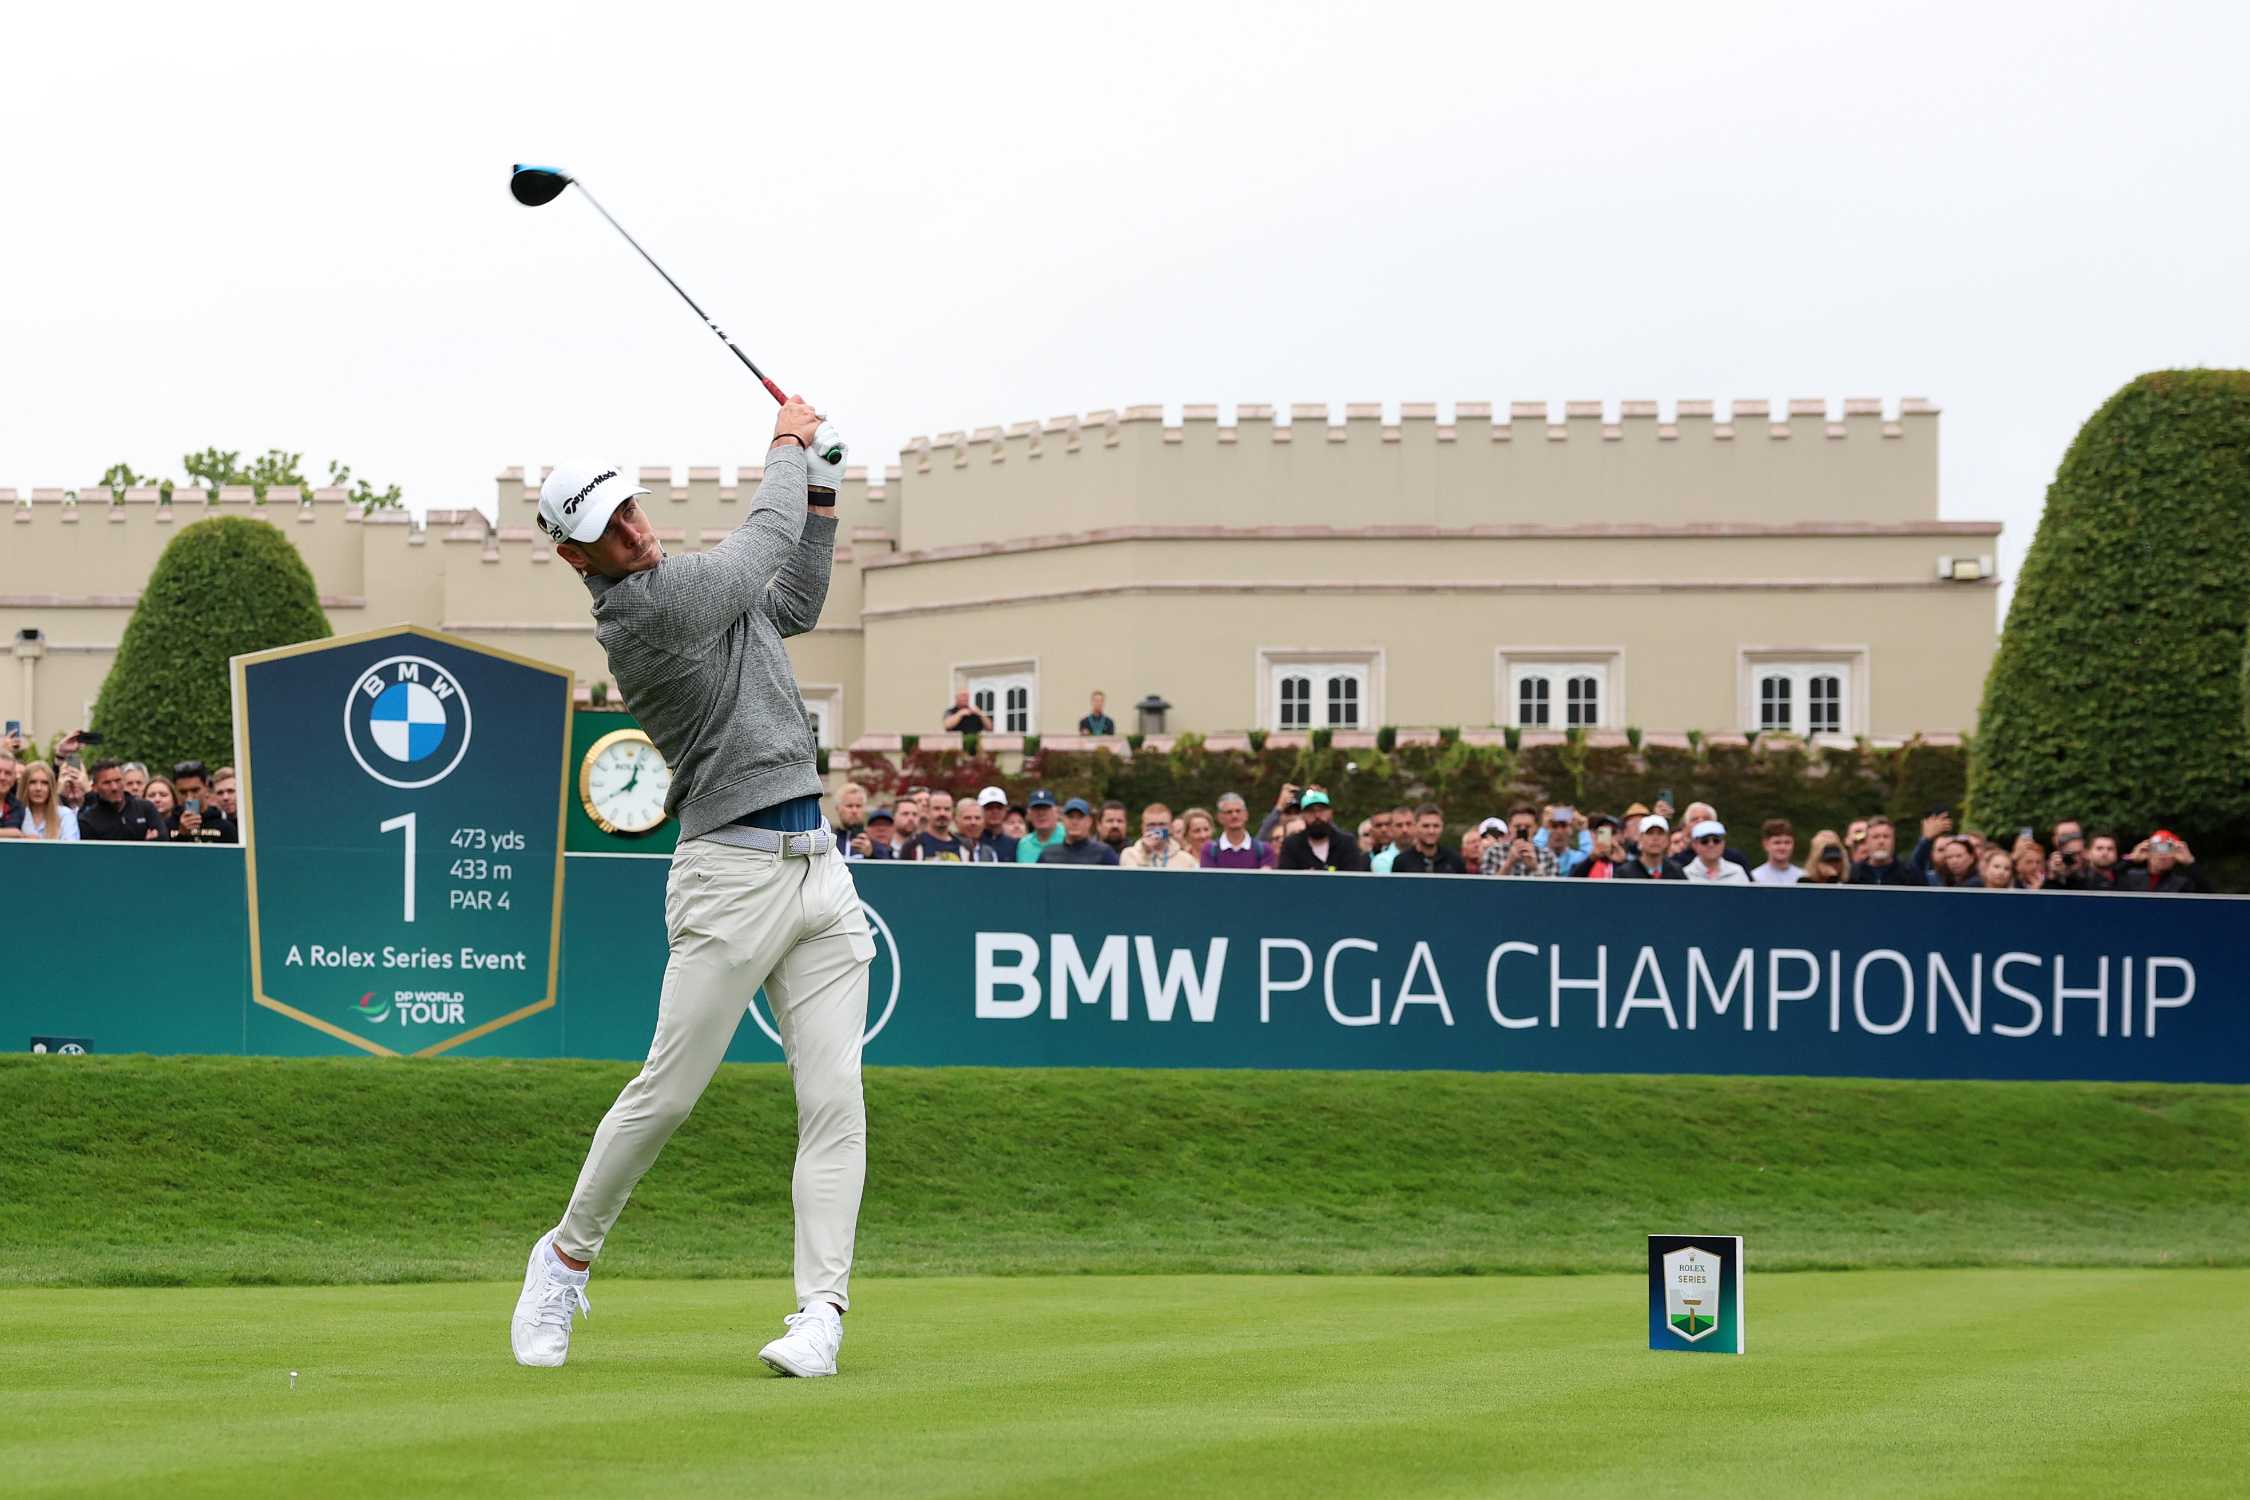 The Festival of Golf BMW PGA Championship opens with star-studded field in the Pro-Am tournament and a live concert.